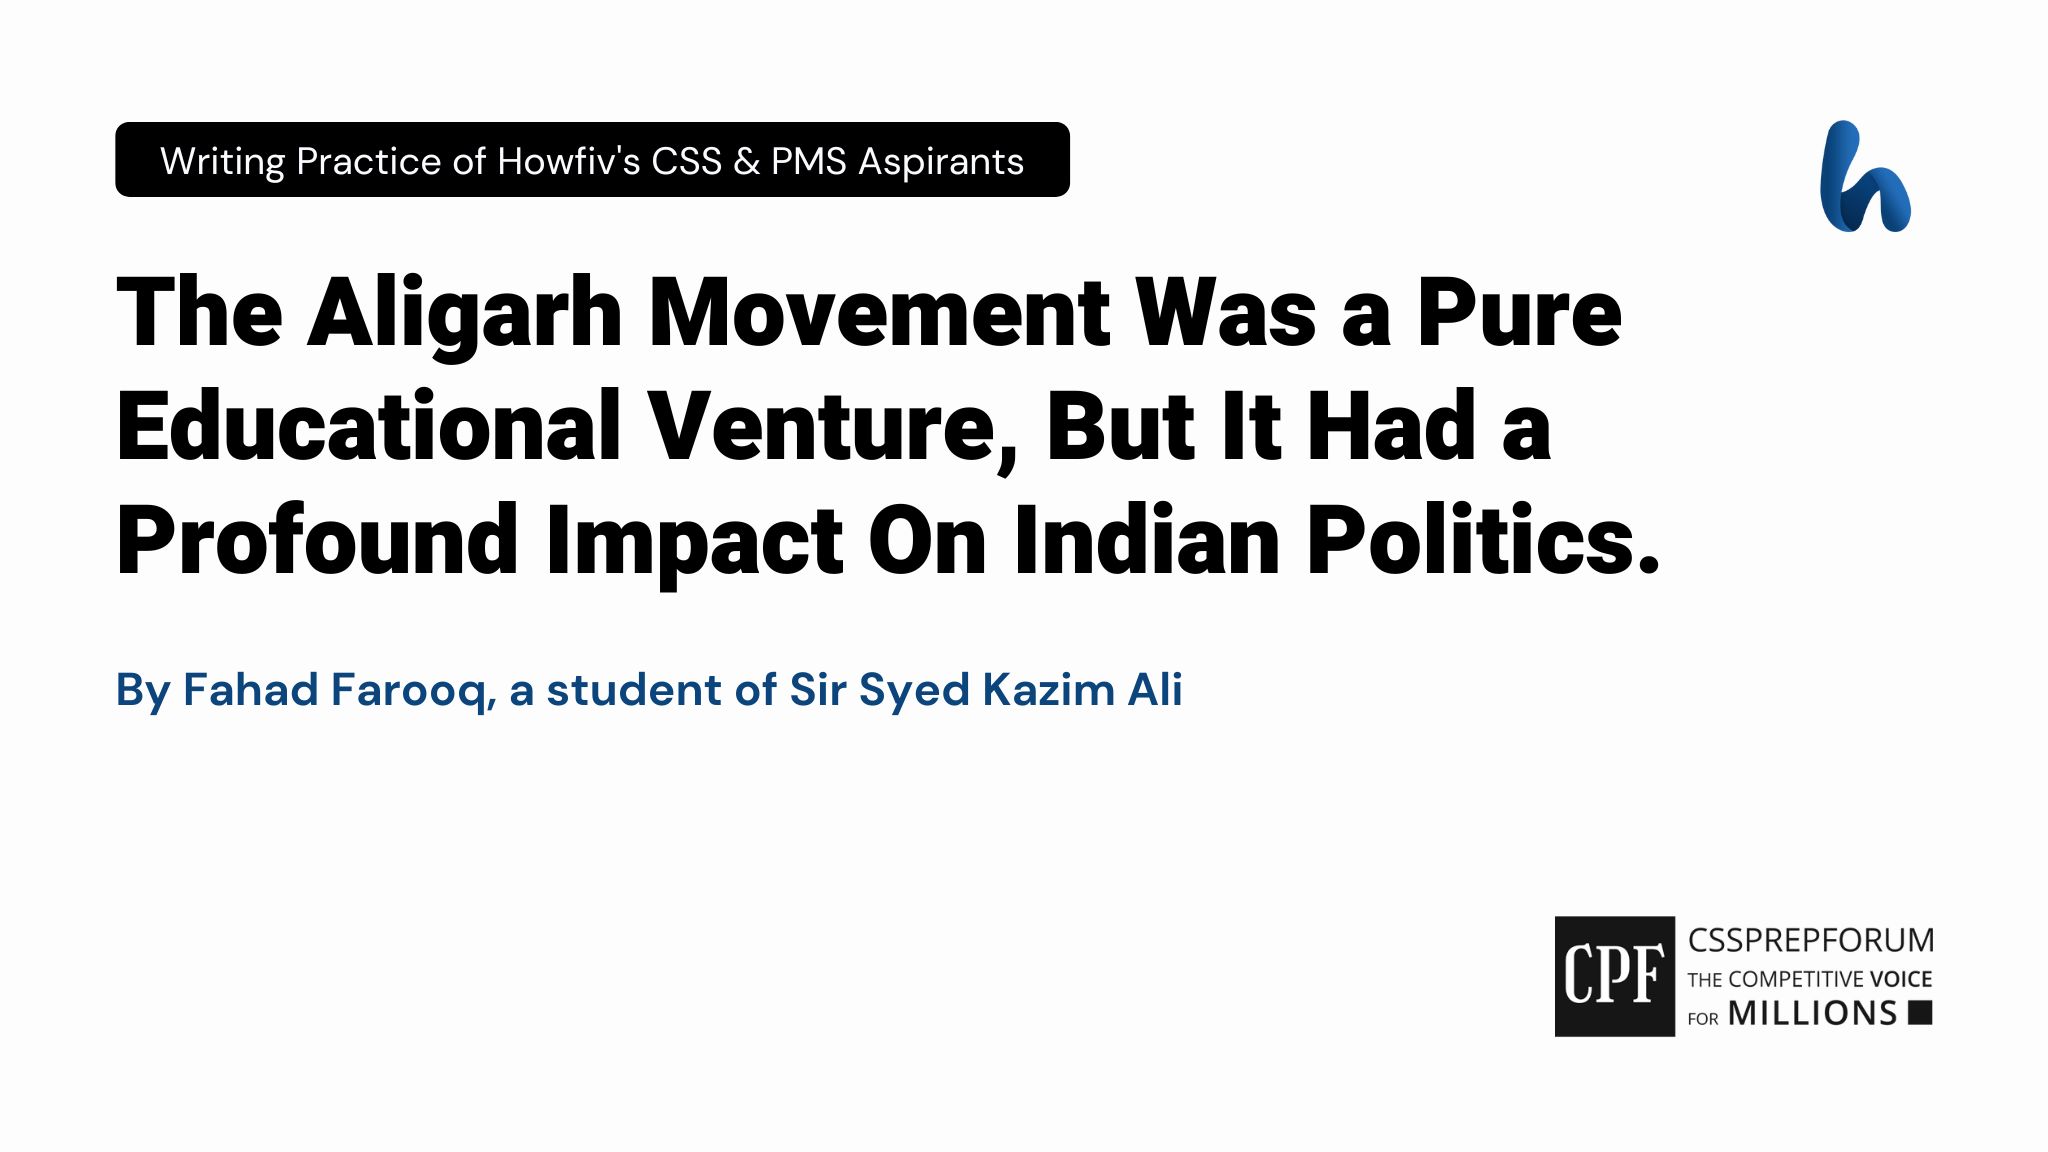 The Aligarh Movement Was a Pure Educational Venture, But It Had a Profound Impact On Indian Politics.